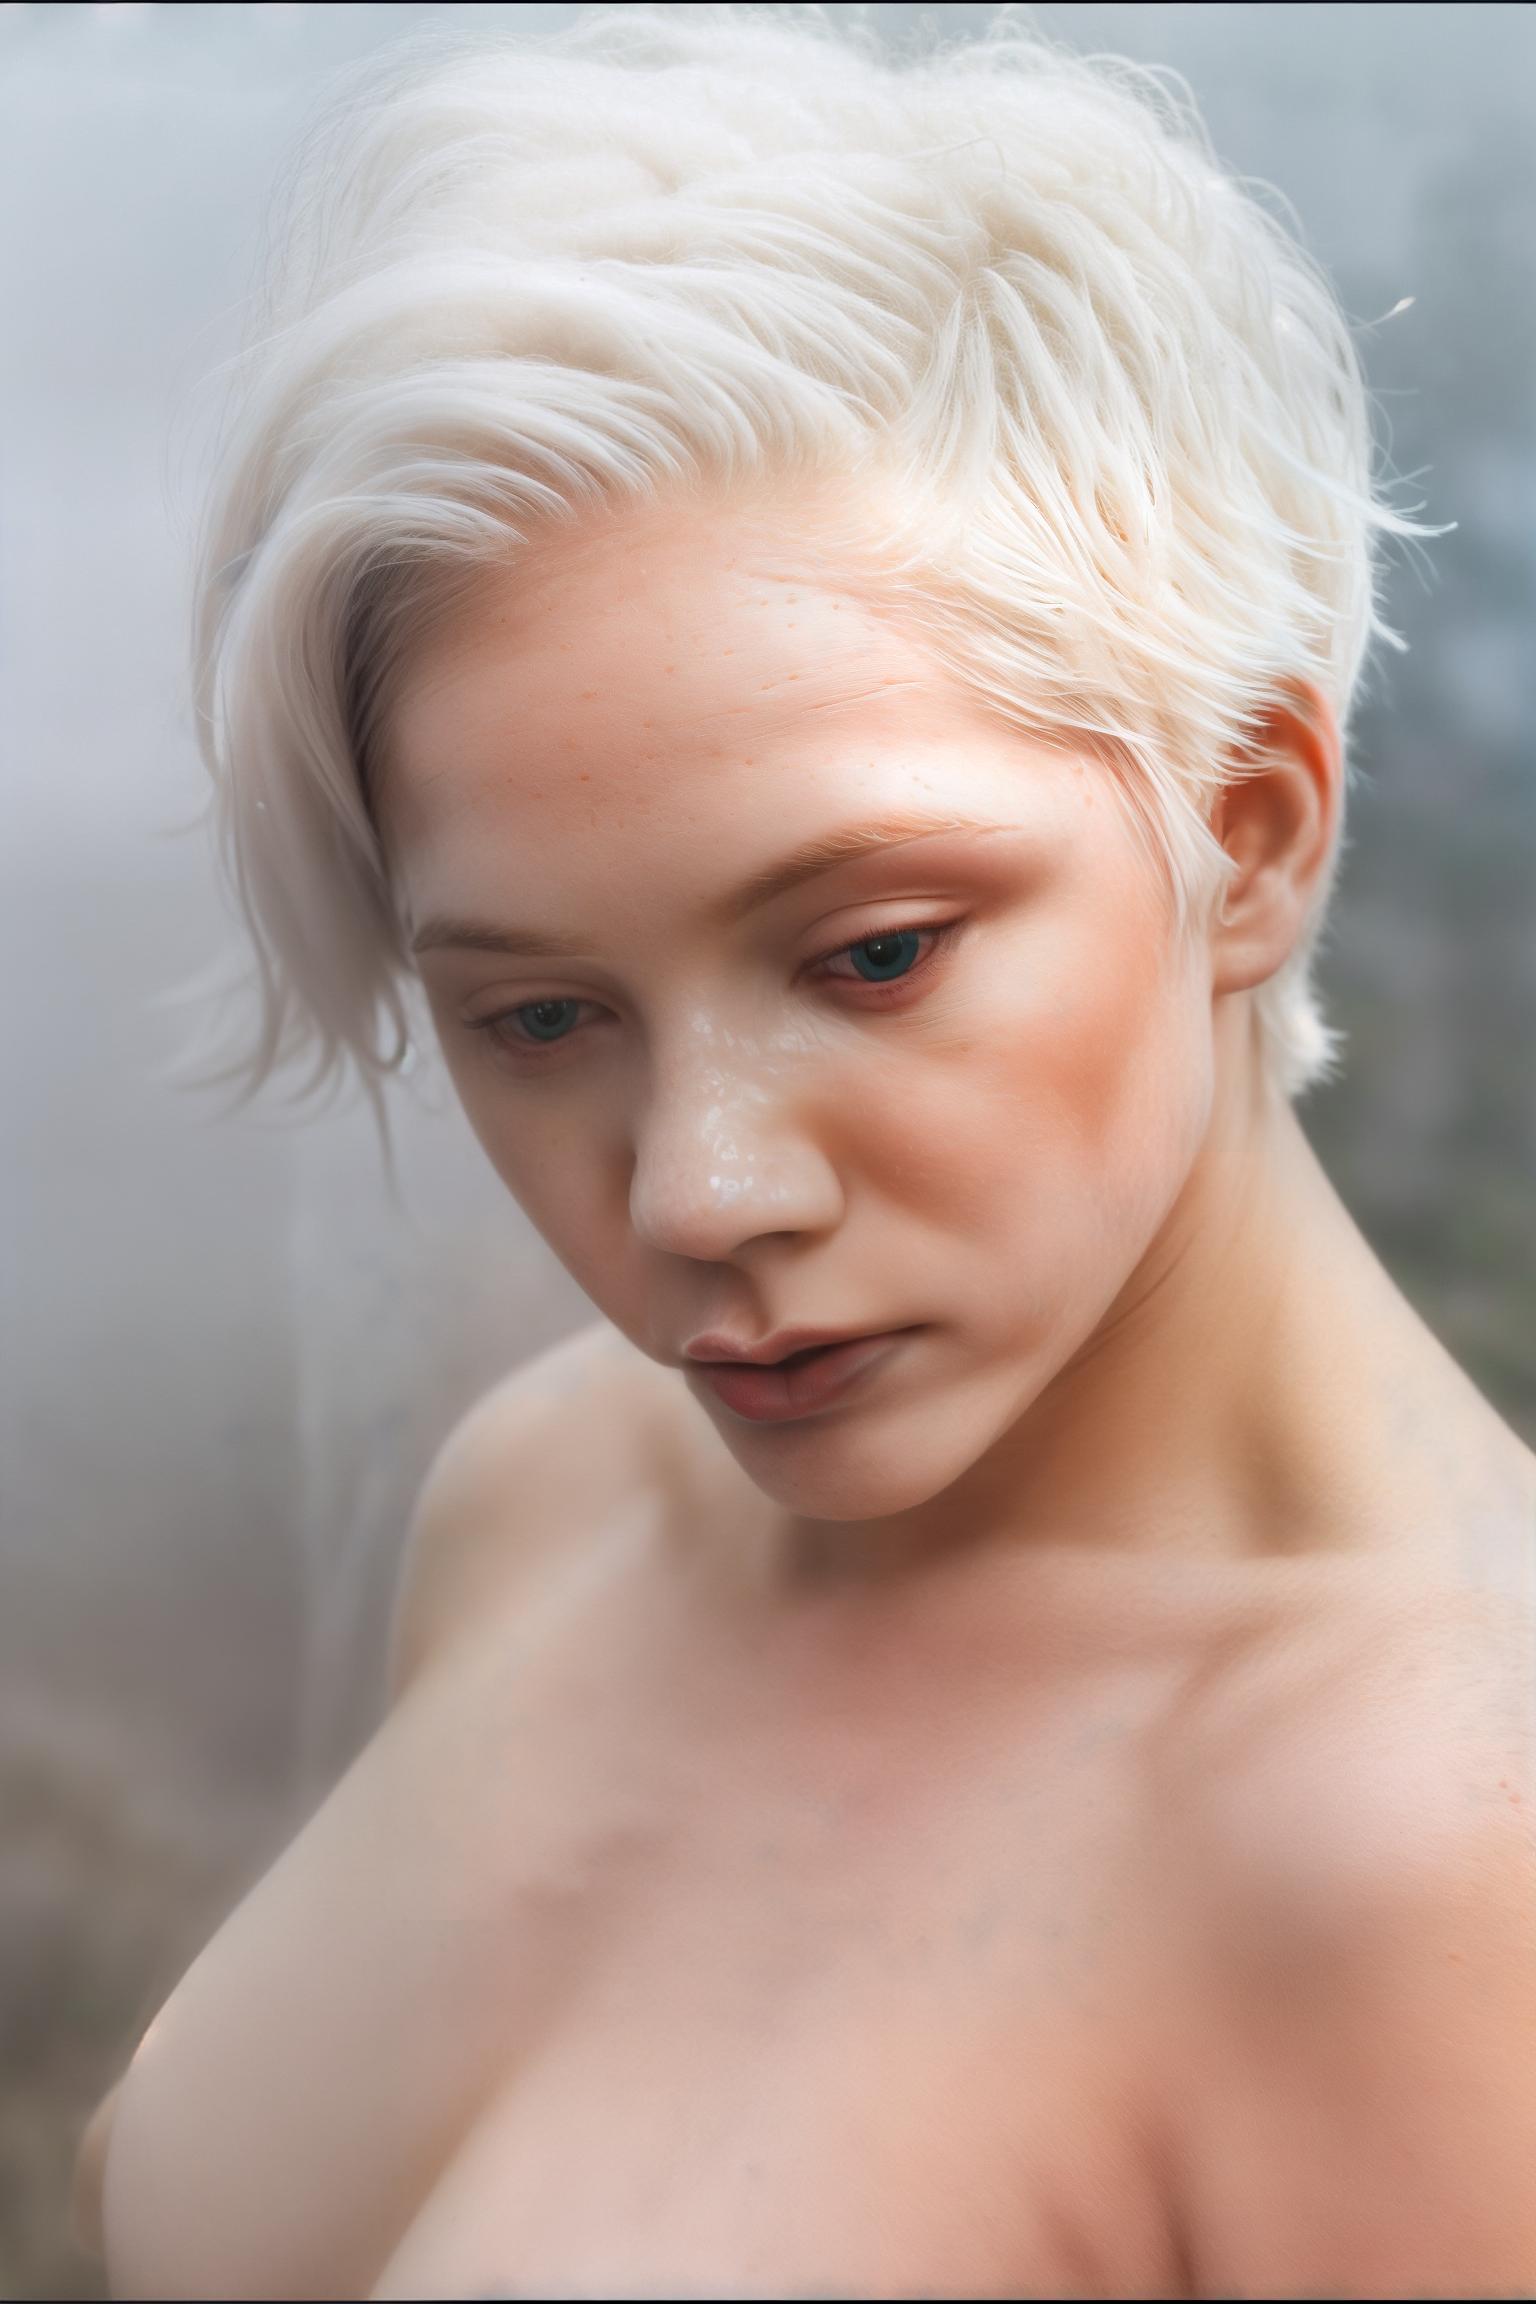  (Dark Fantasy Aesthetic:1.2), (Glamour:1.3) photo of a 20yo, (strikingly beautiful:1.2) vivacious, enigmatic, ethereal, (albino:1.3) (nymph:1.3), (albinism:1.4), Lengthened Rectangular Face with Noticeable Jaw and Cheekbones, Clean, Straight Eyebrows, Wide Set Close Set Eyes, Majestic Aquiline Nose, Full Lips, windswept (Fine) (stylish short white hair:1.3), (looking at viewer),(Ashen skin:1.3), (flawless skin:1.3), (shiny skin), diaphanous white dress, high neckline on dress, (foggy:1.4), (bathed in thick fog:1.4), (half obscured:1.3), (Close up:1.2), Dutch Angle), (dynamic composition:1.2), (shallow depth of field:1.2), bright lighting vibrant, ((masterpiece)), ((Realistic Vision)),((fine details)), RAW, 8K, UHD, natural lighting, perfect